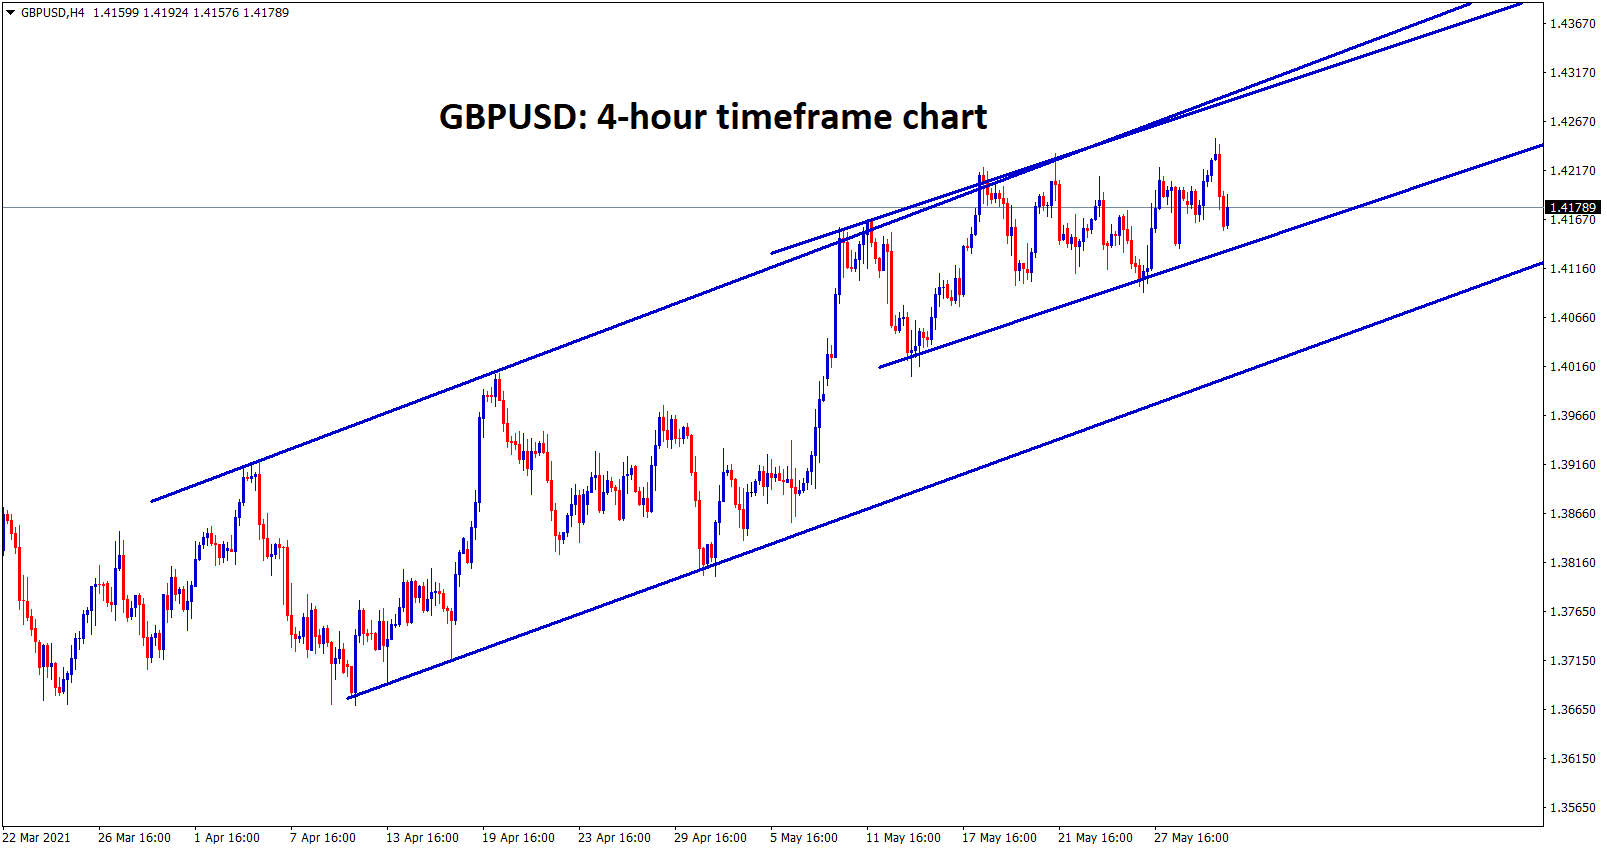 gbpusd ranging at the important resistance wait for breakout or reversal.